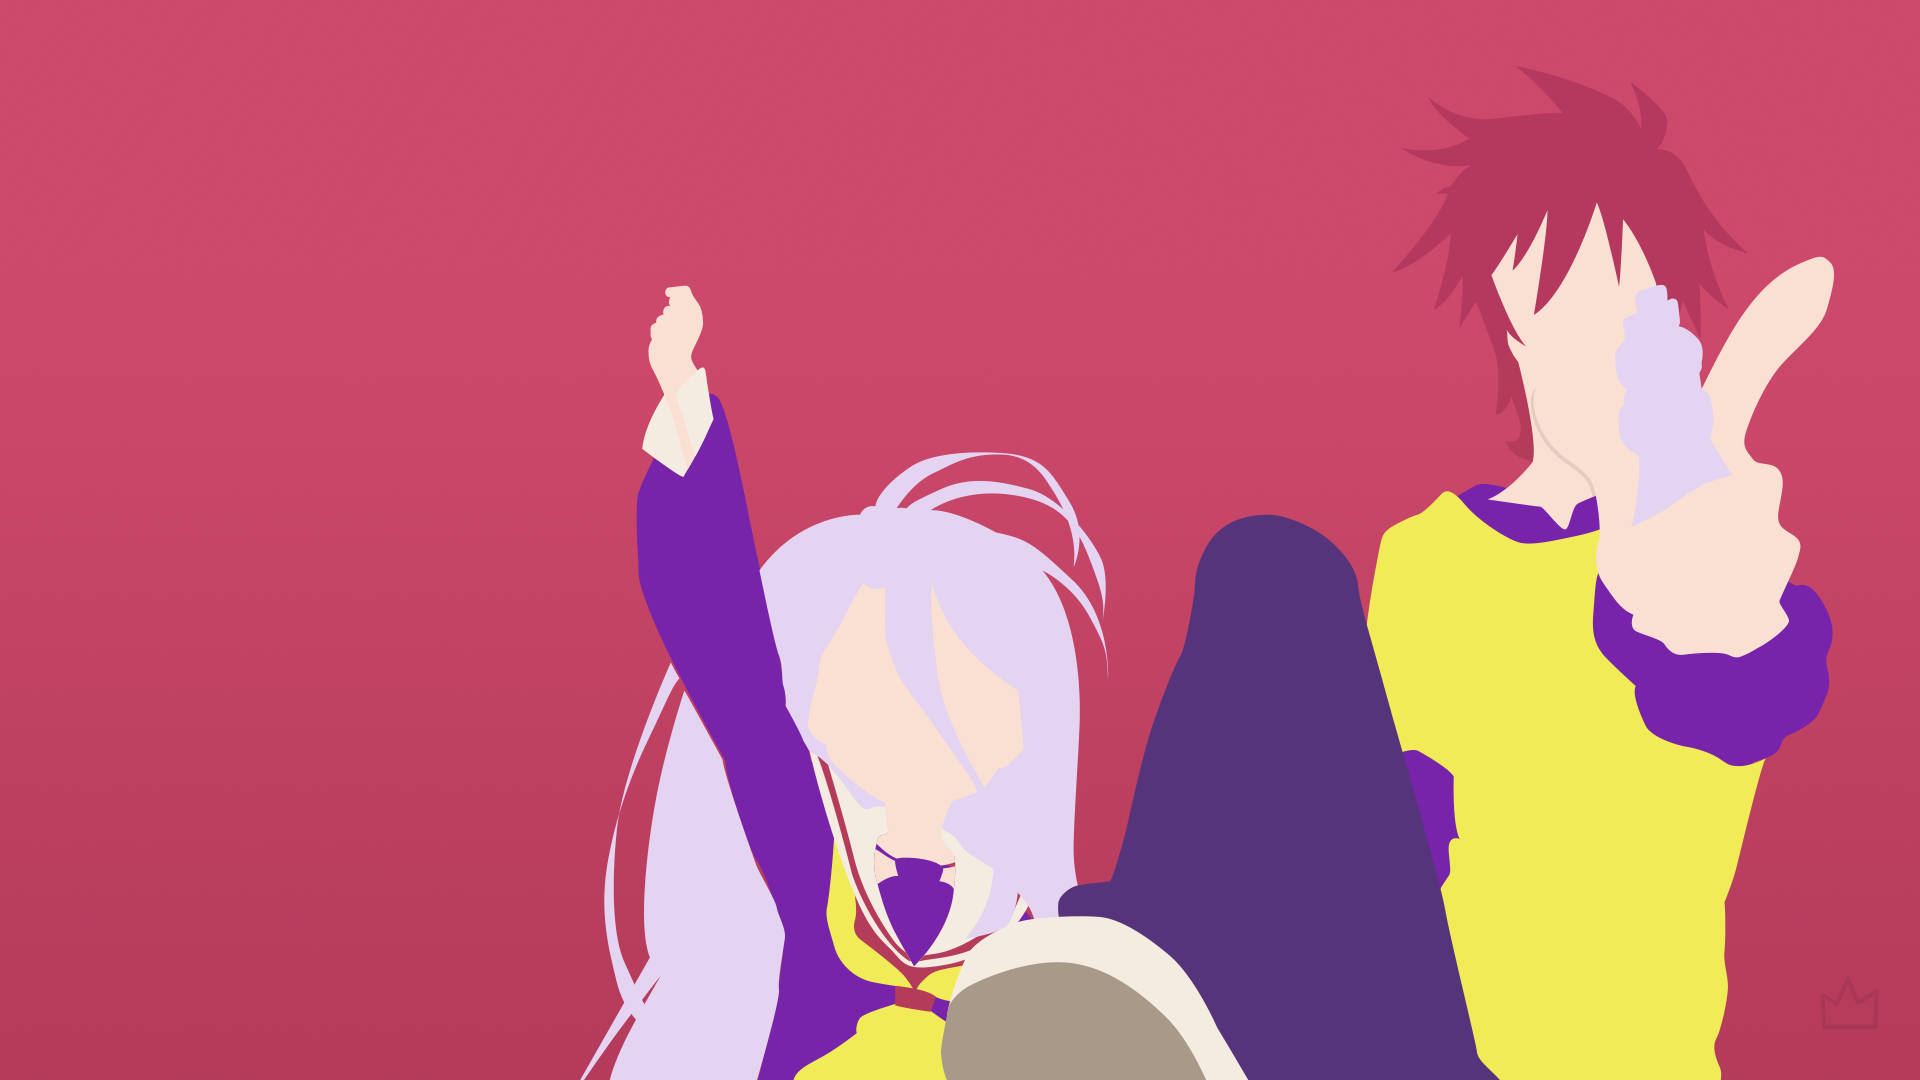 No Game No Life Power Siblings Background